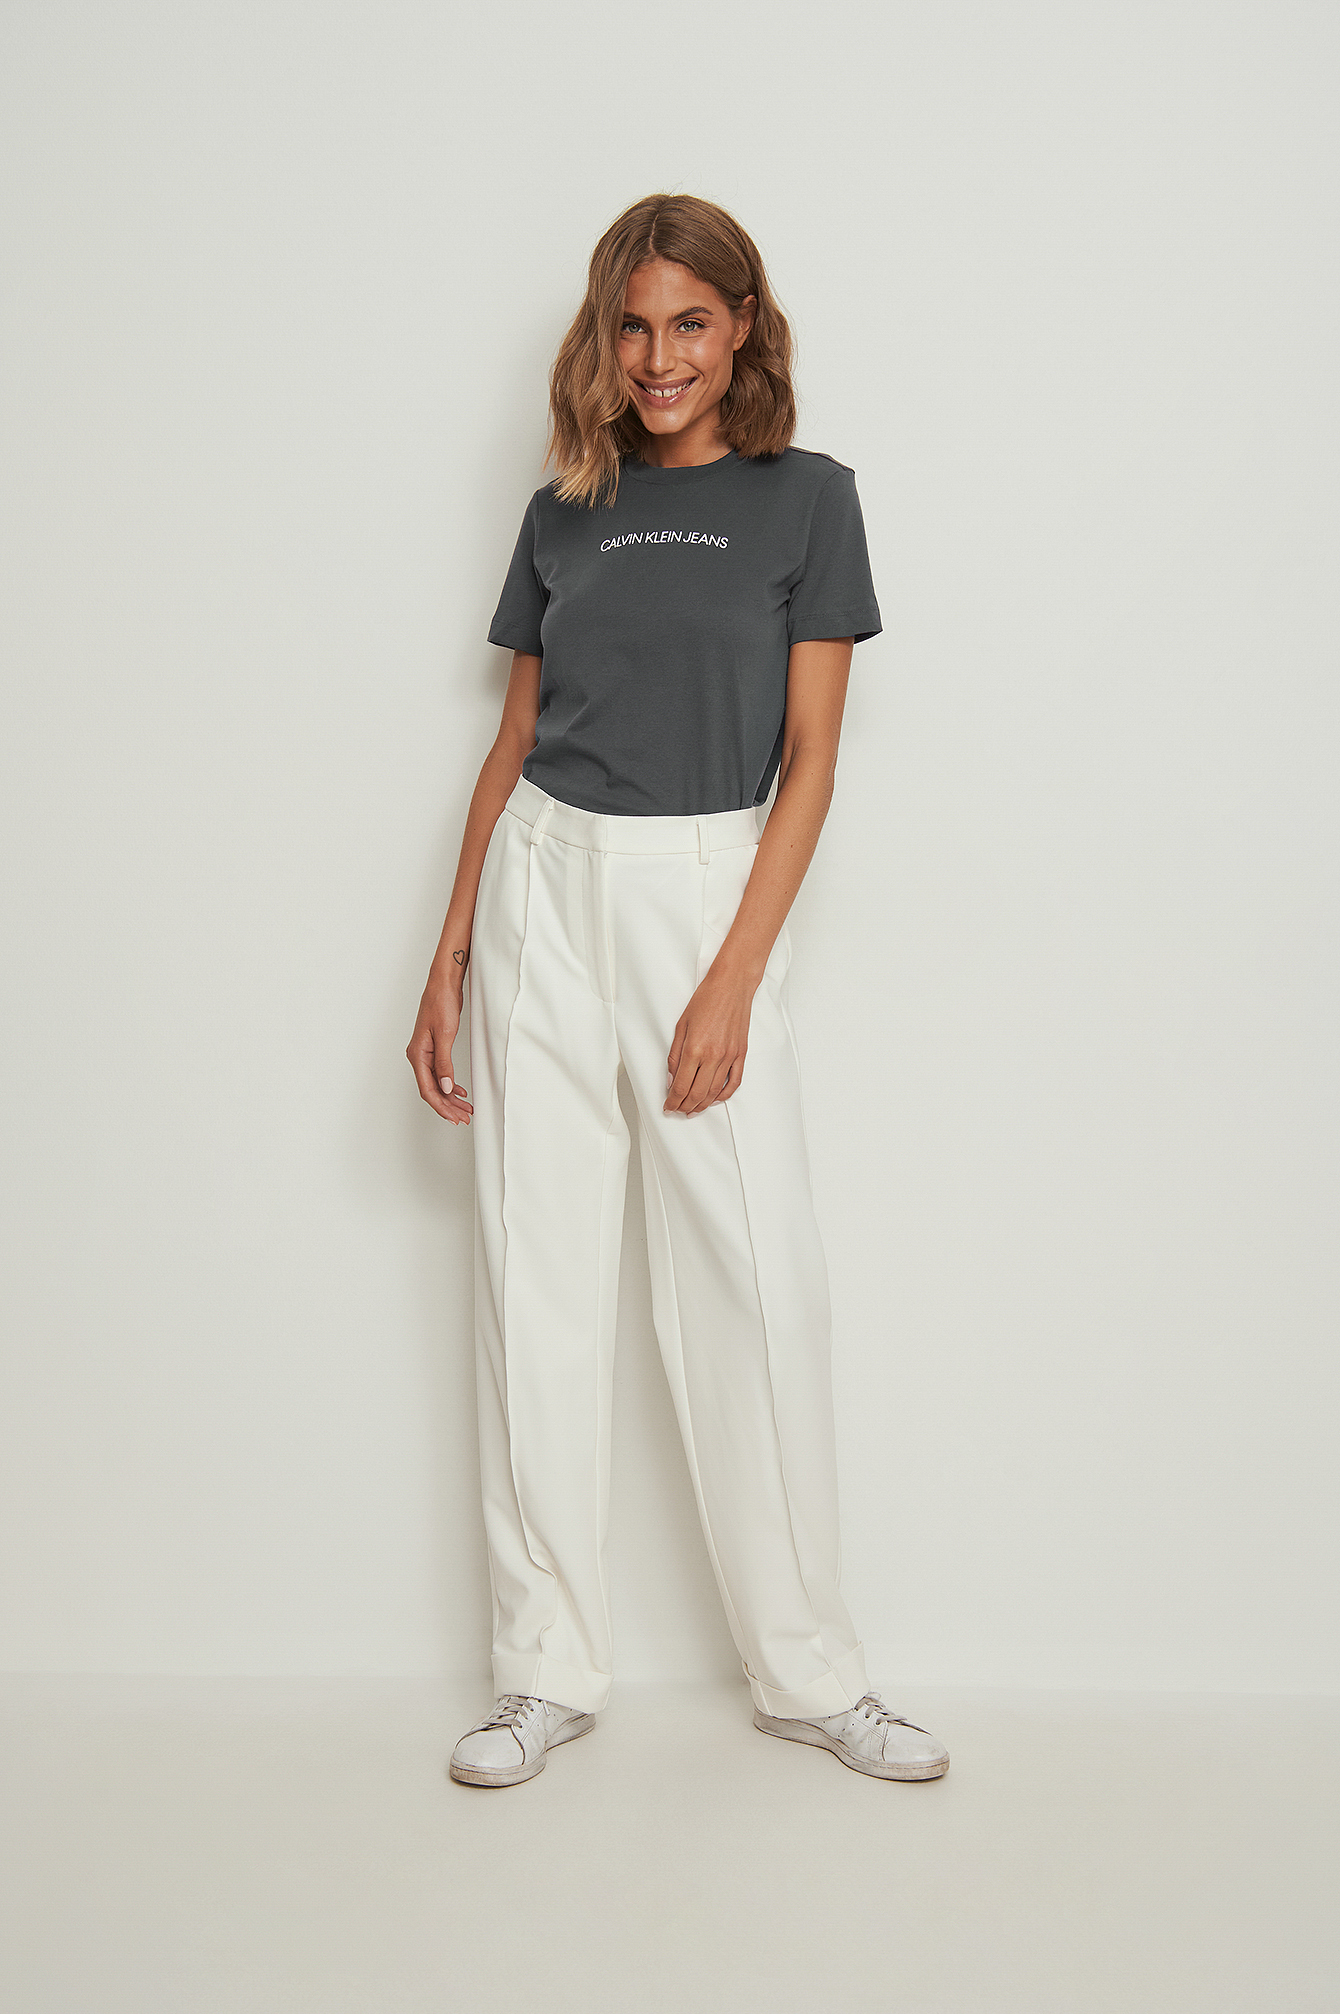 Shrunken Institutional Tee Outfit